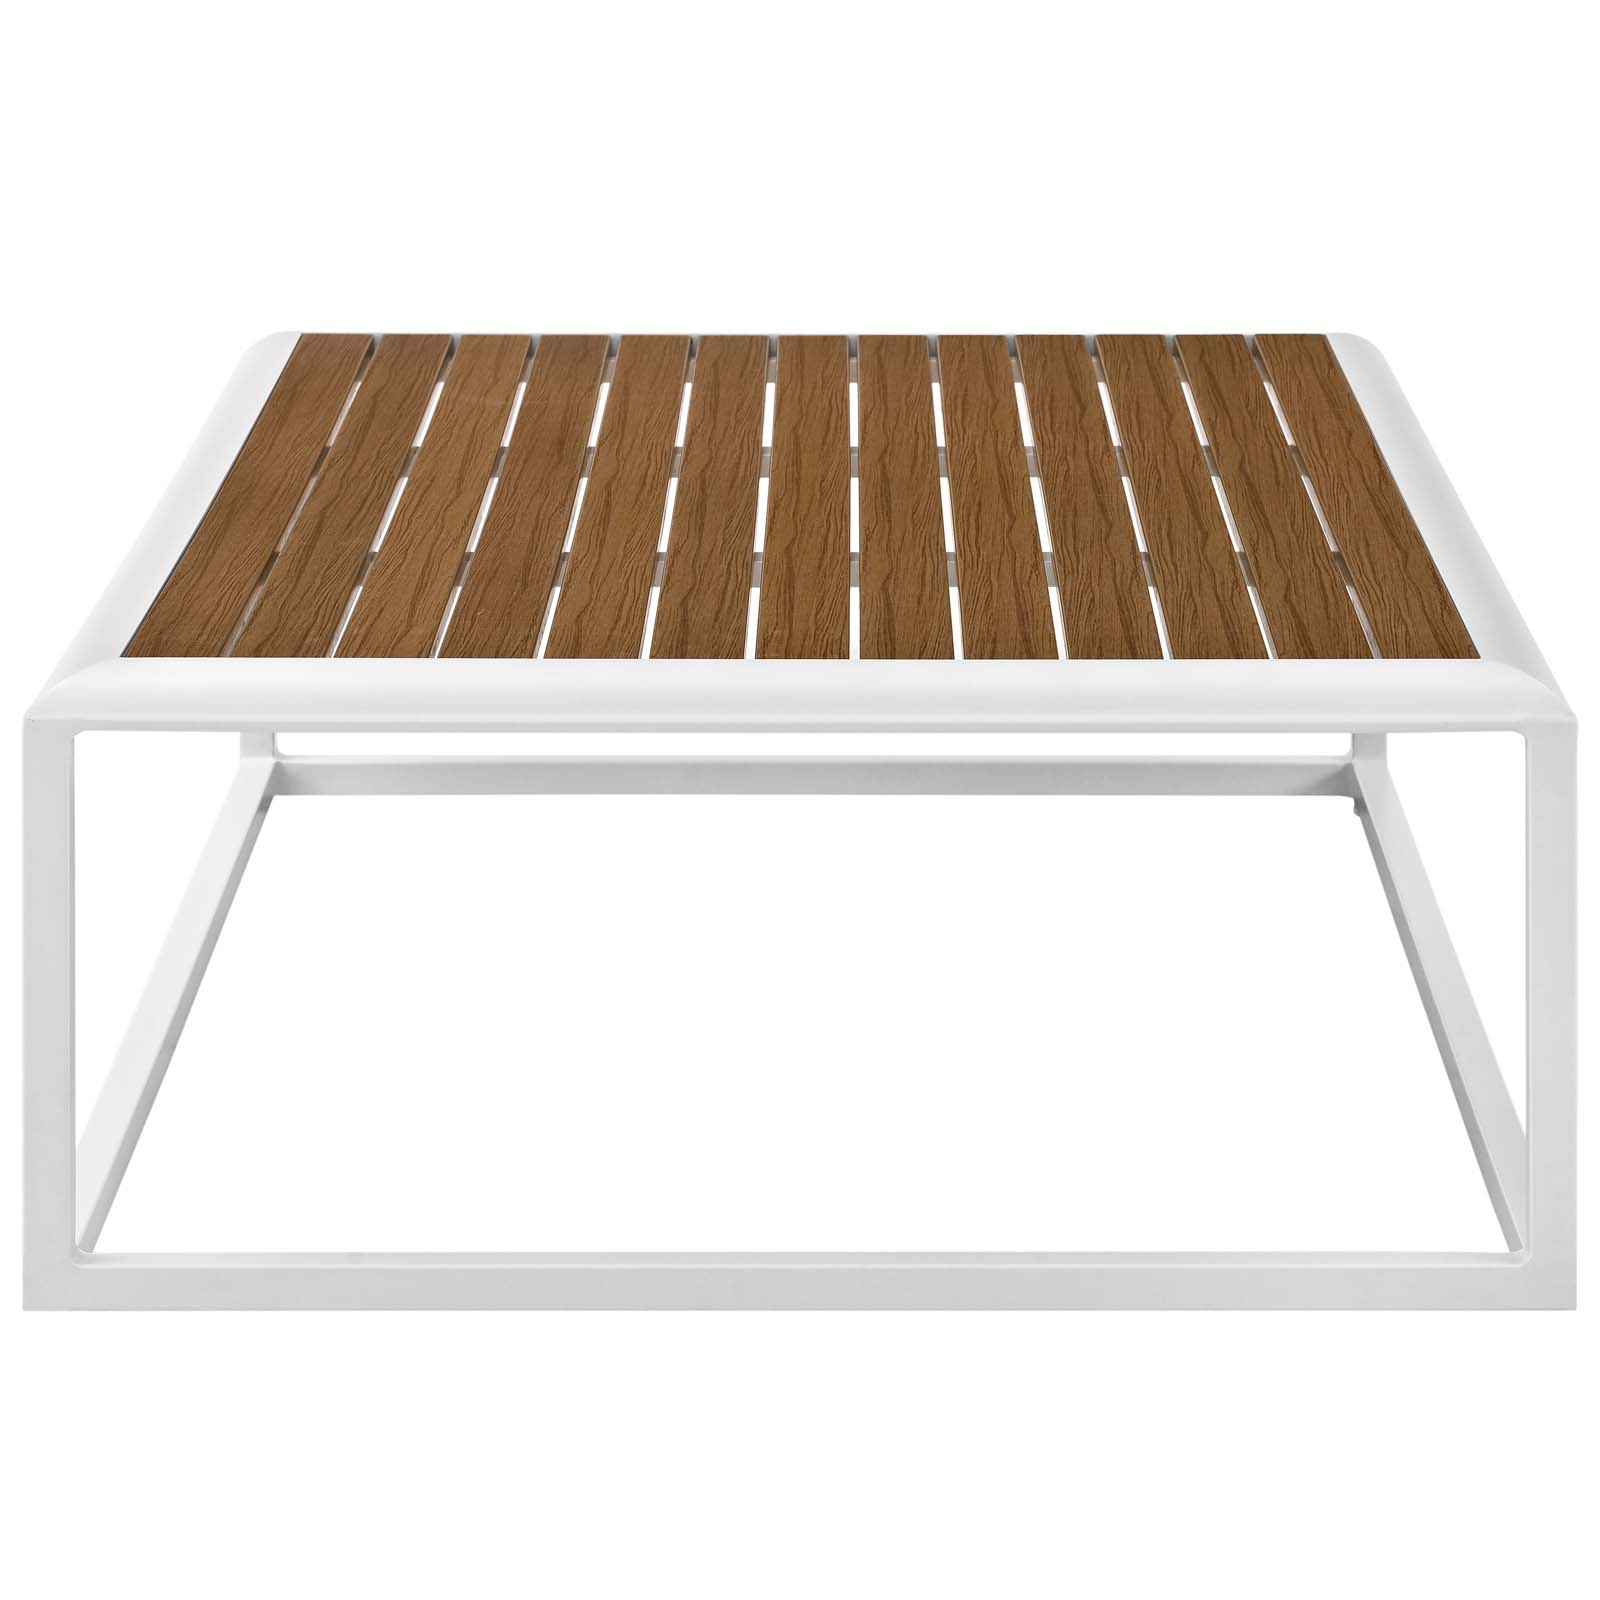 Contemporary Modern Urban Designer Outdoor Patio Balcony Garden Furniture Coffee Side Table, Aluminum Faux Wood, White Natural - image 3 of 5